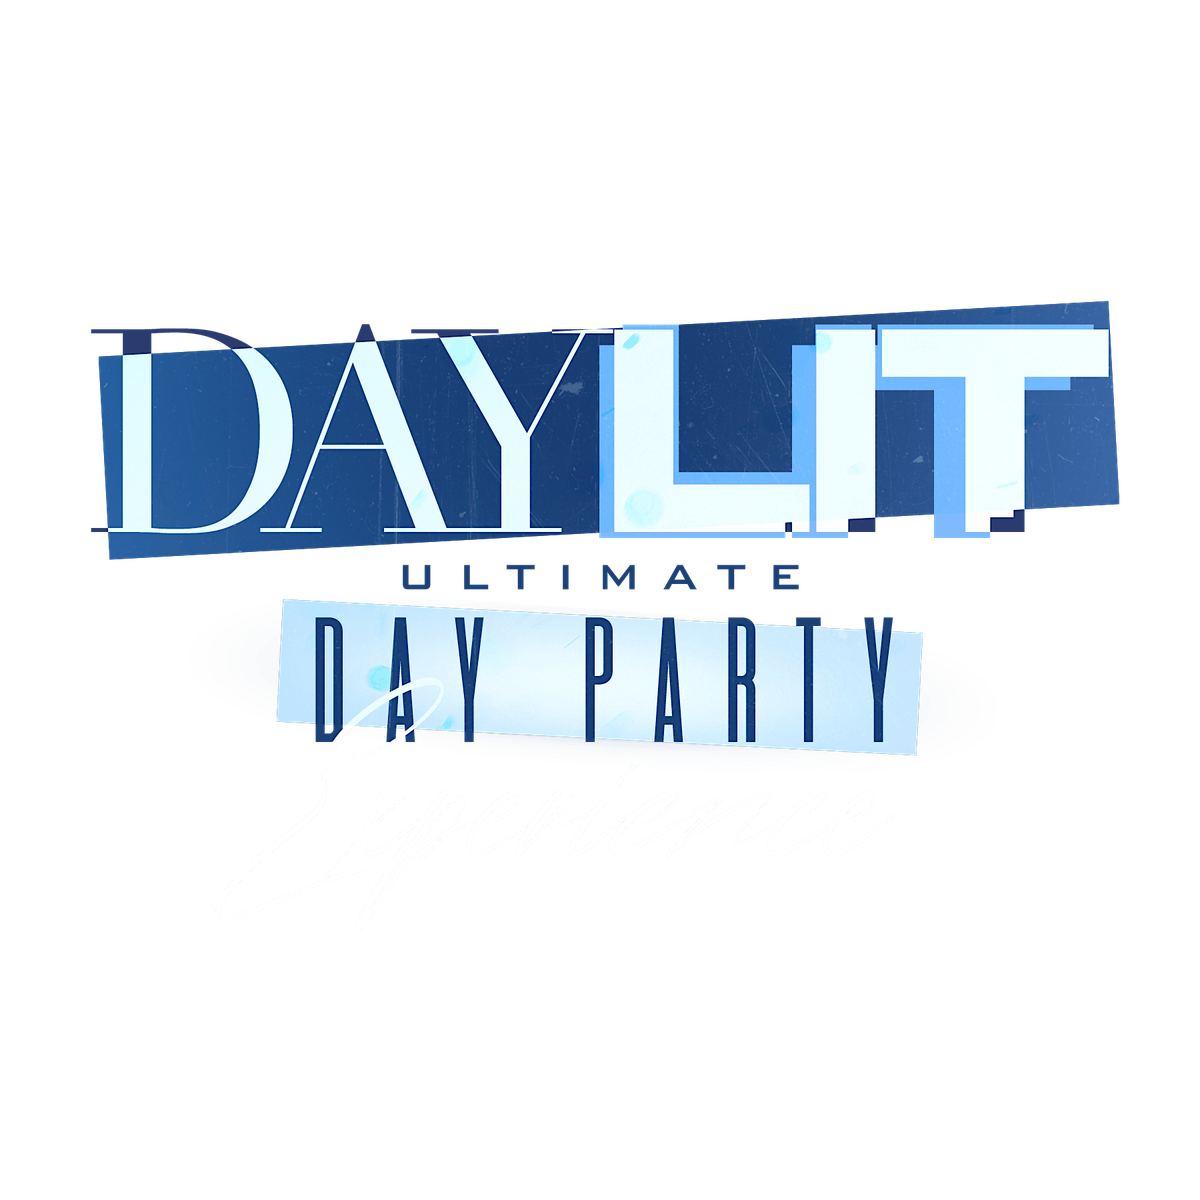 DAYLIT - ATL  [THE ULTIMATE DAY PARTY EXPERIENCE]